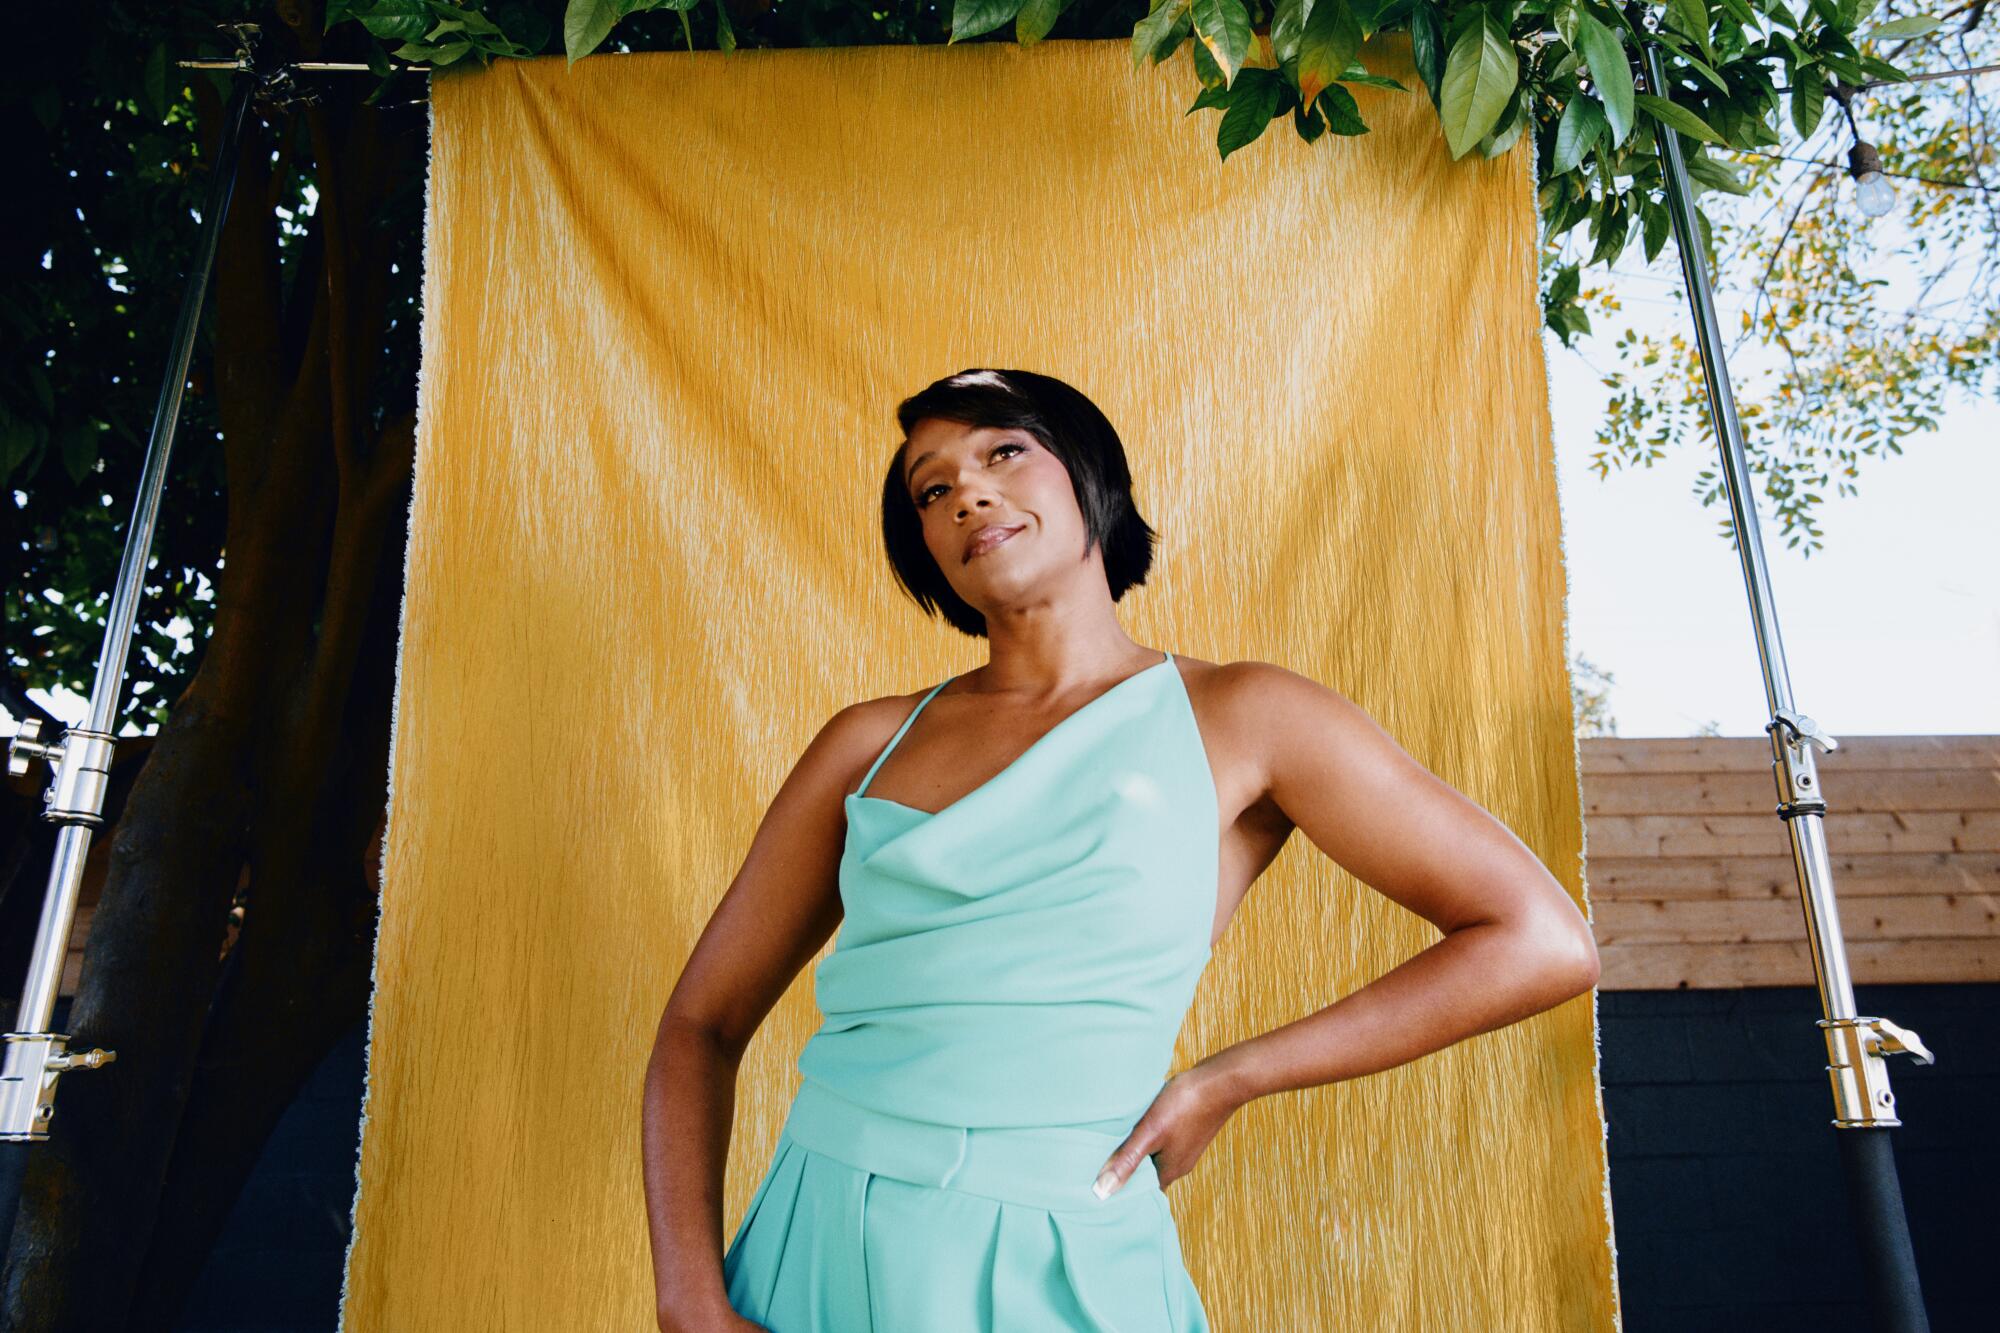  Tiffany Haddish, in a mint green dress, stands before a mustard-yellow backdrop outdoors.